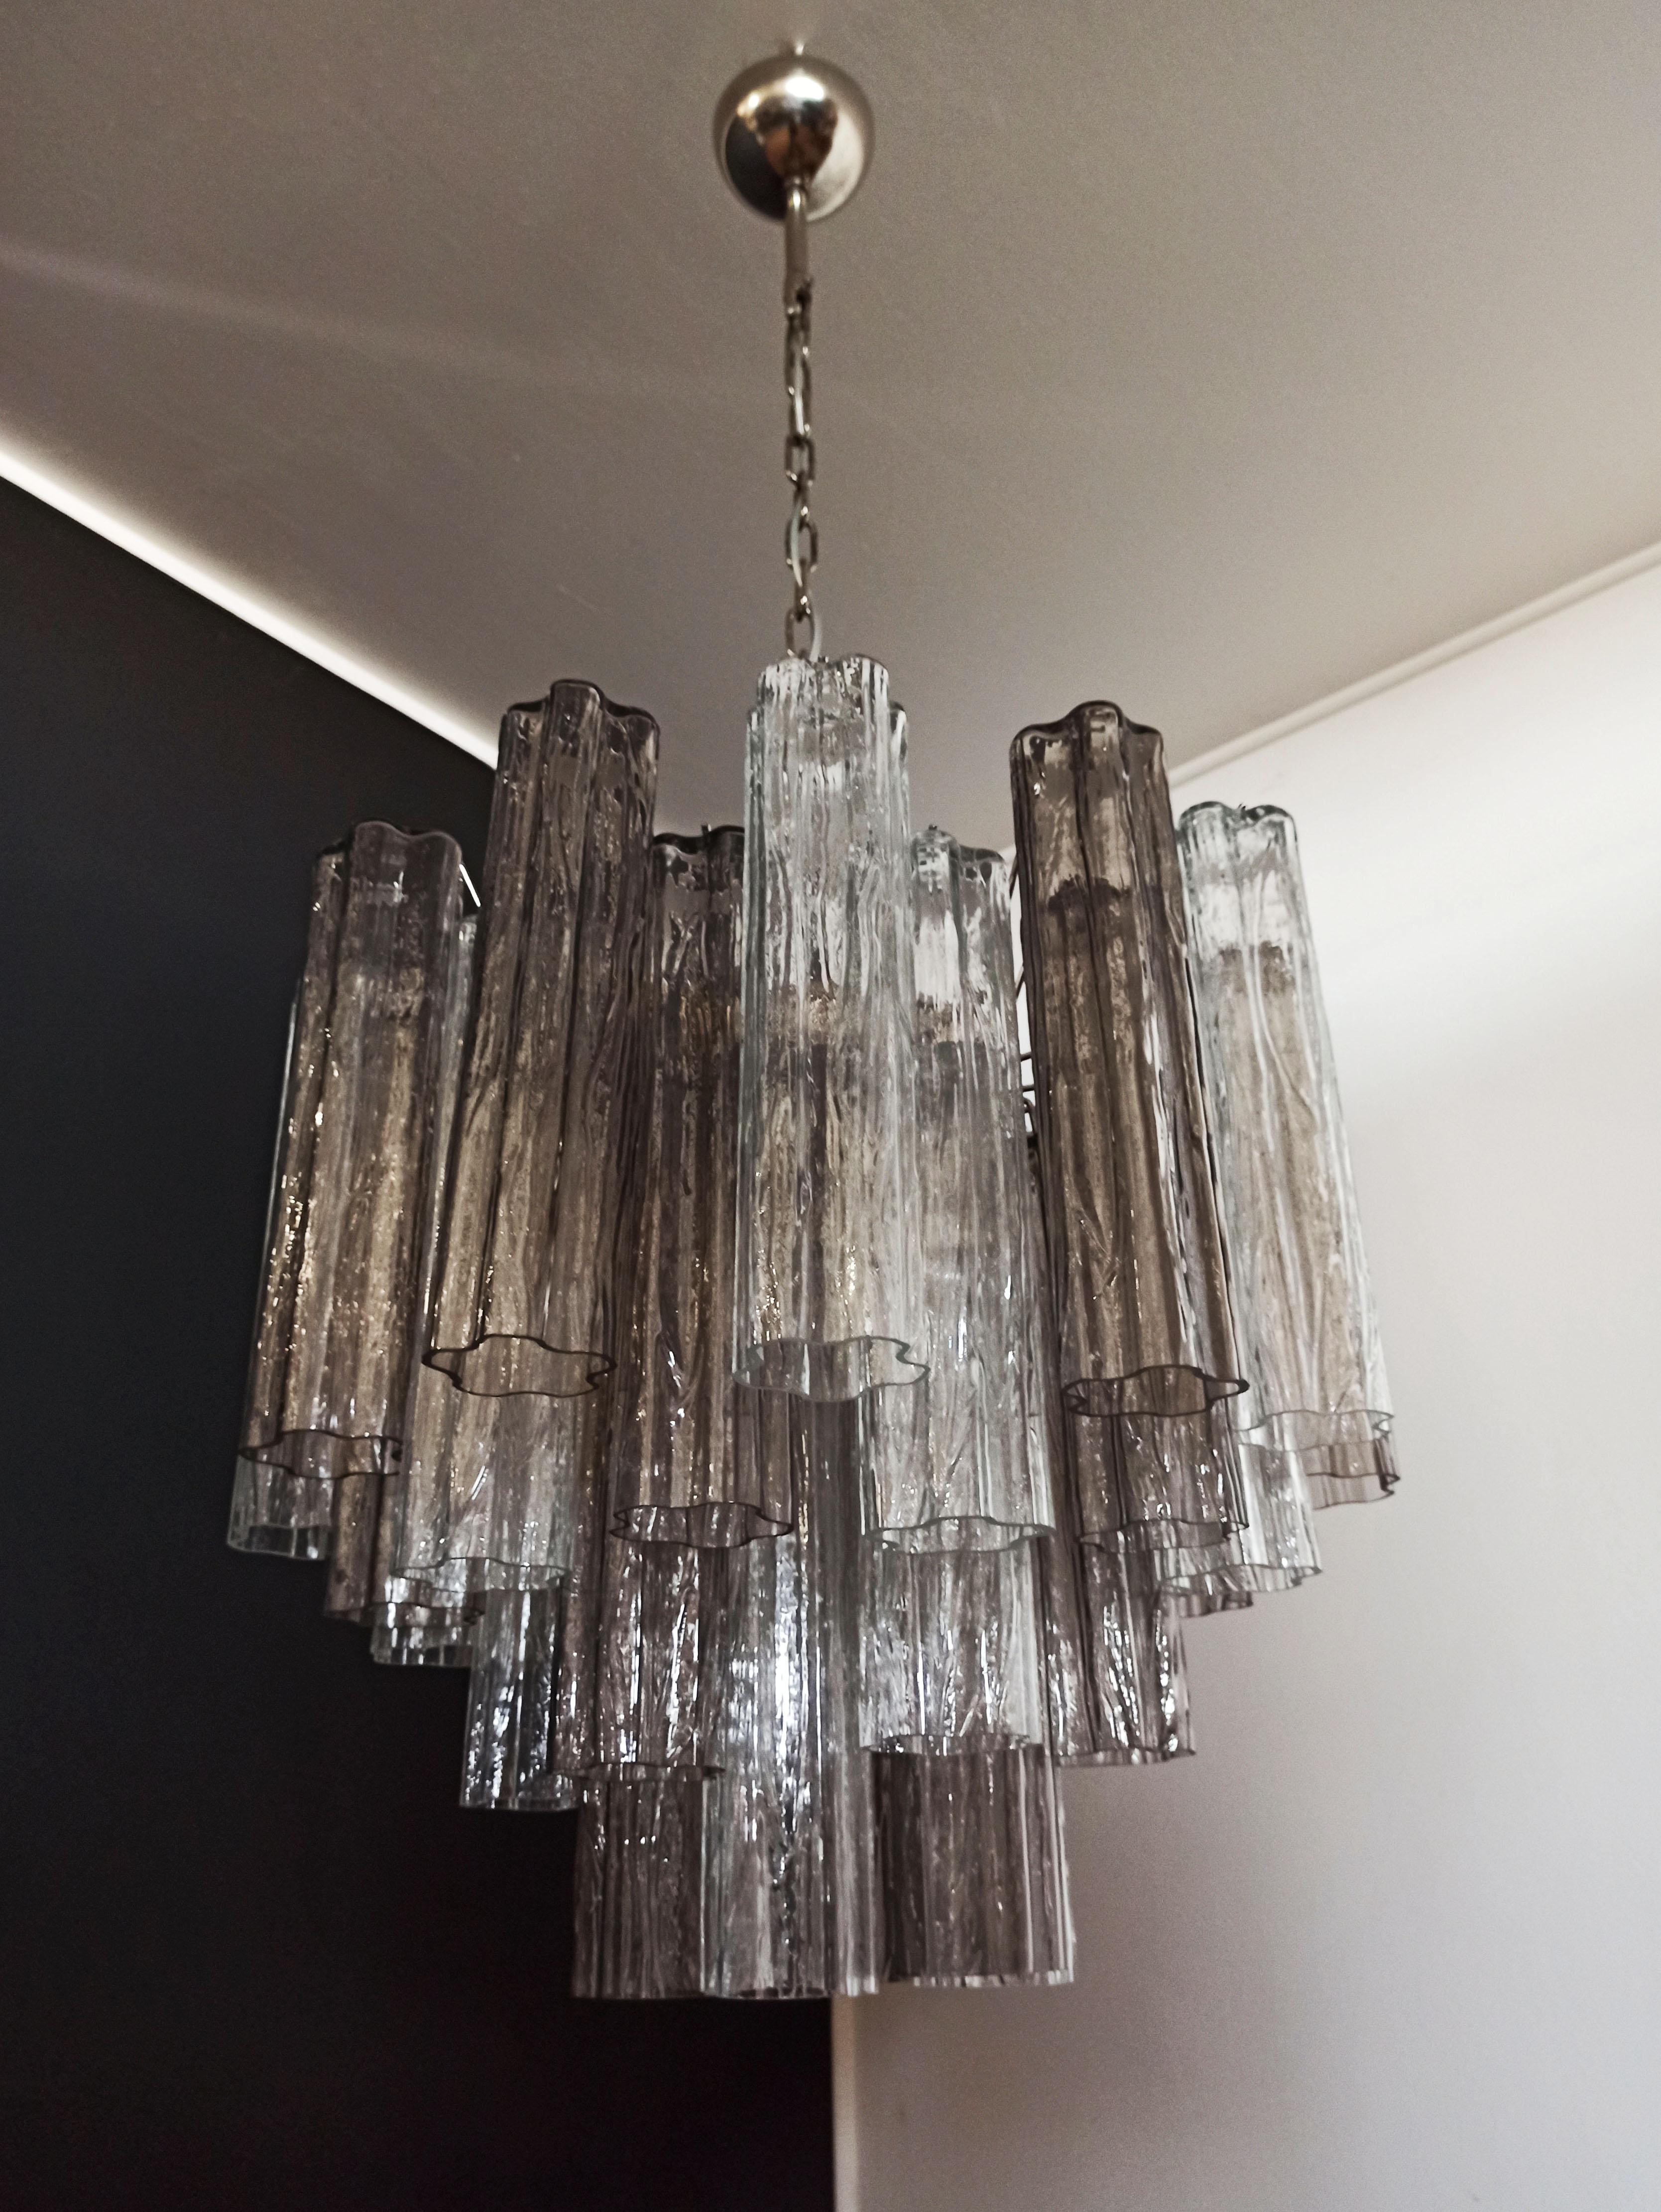 Italian vintage chandelier in Murano glass and nickel-plated metal structure. The armor polished nickel supports 36 large smoked  and clear glass tubes in a star shape. (18 smoked glasses + 18 trasparent glasses)
Period:	late XX century
Dimensions: 